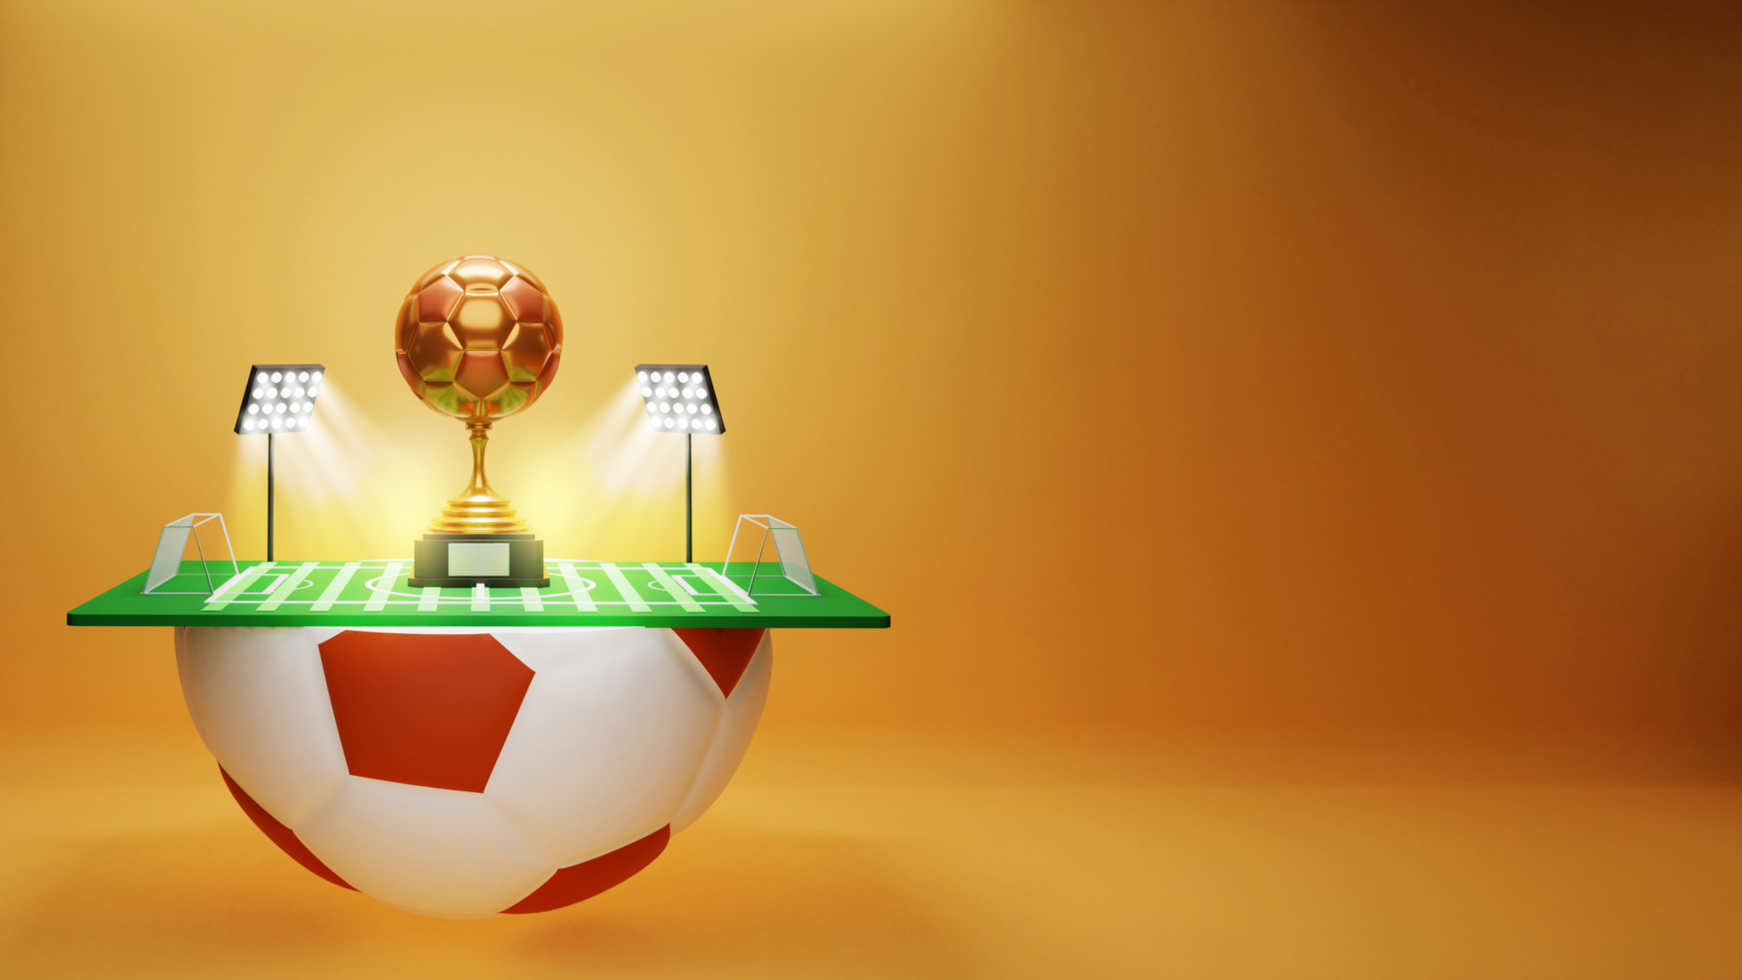 3D Half Football Field View With Stadium Lights, Golden Soccer Trophy Cup And Copy Space. psd